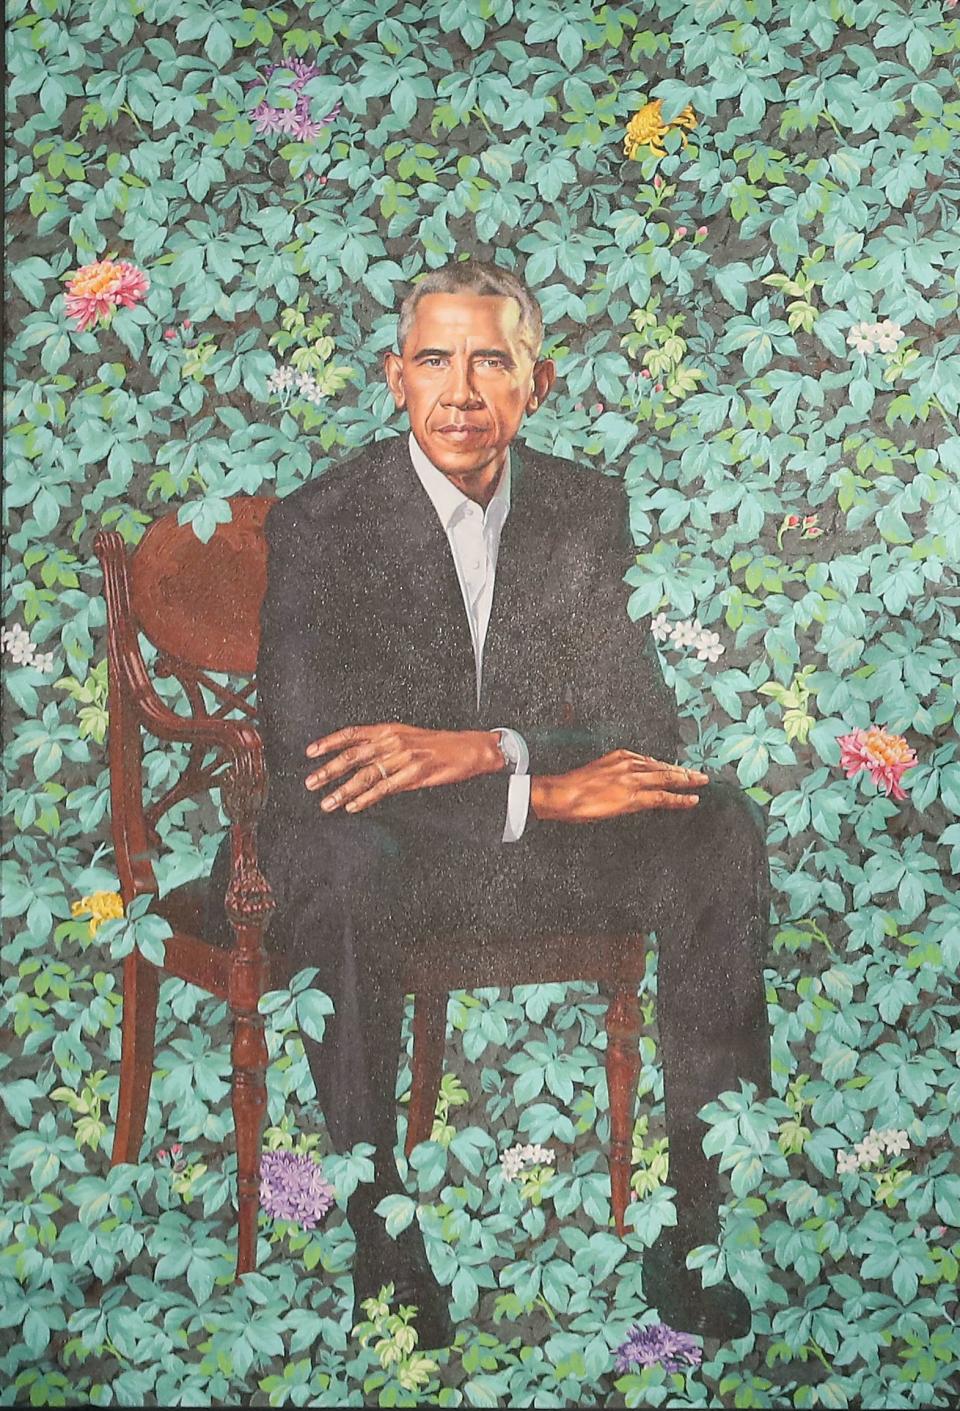 Barack Obama's portrait by Kehinde Wiley in further detail. (Photo: Mark Wilson via Getty Images)